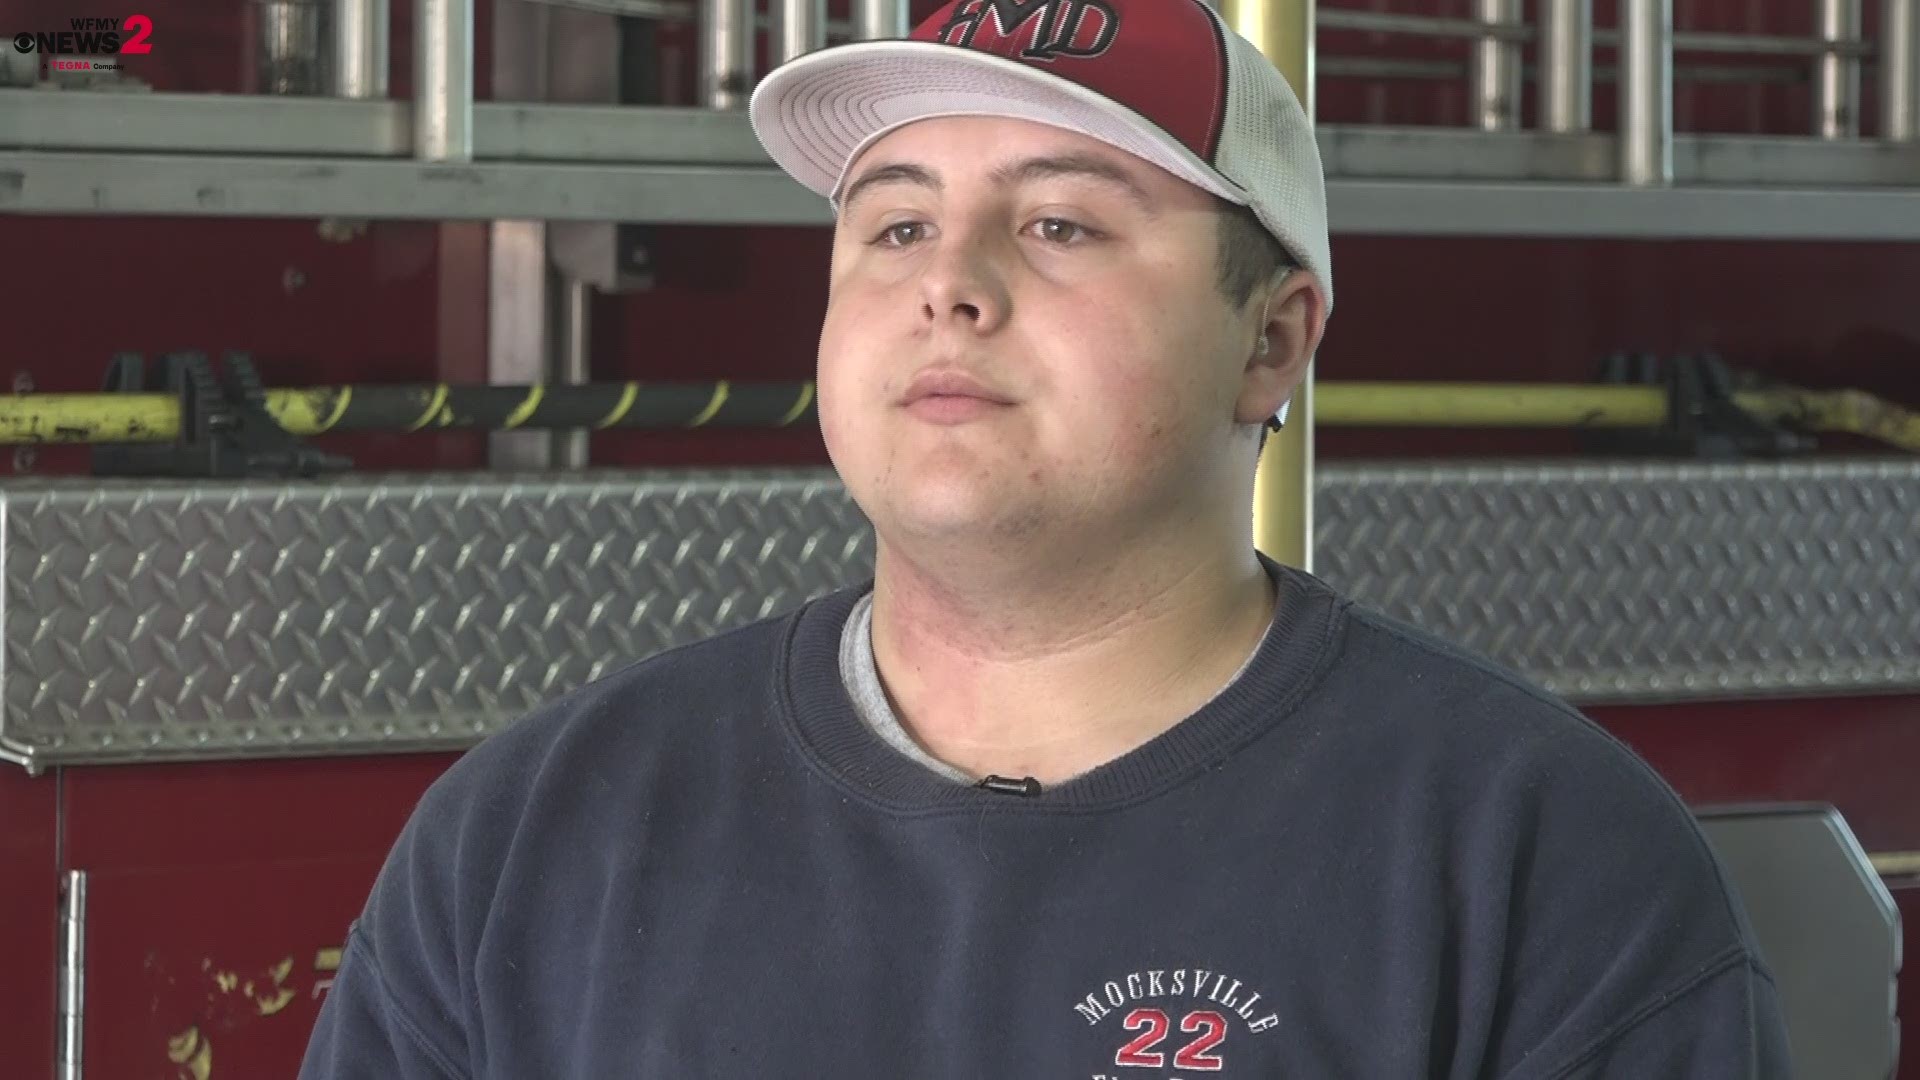 Austin Freidt was born deaf, and thanks to his double cochlear implants, he can hear normally. According to the NFPA 1582 standard, he is not fully capable of being the firefighter he's always wanted to become.